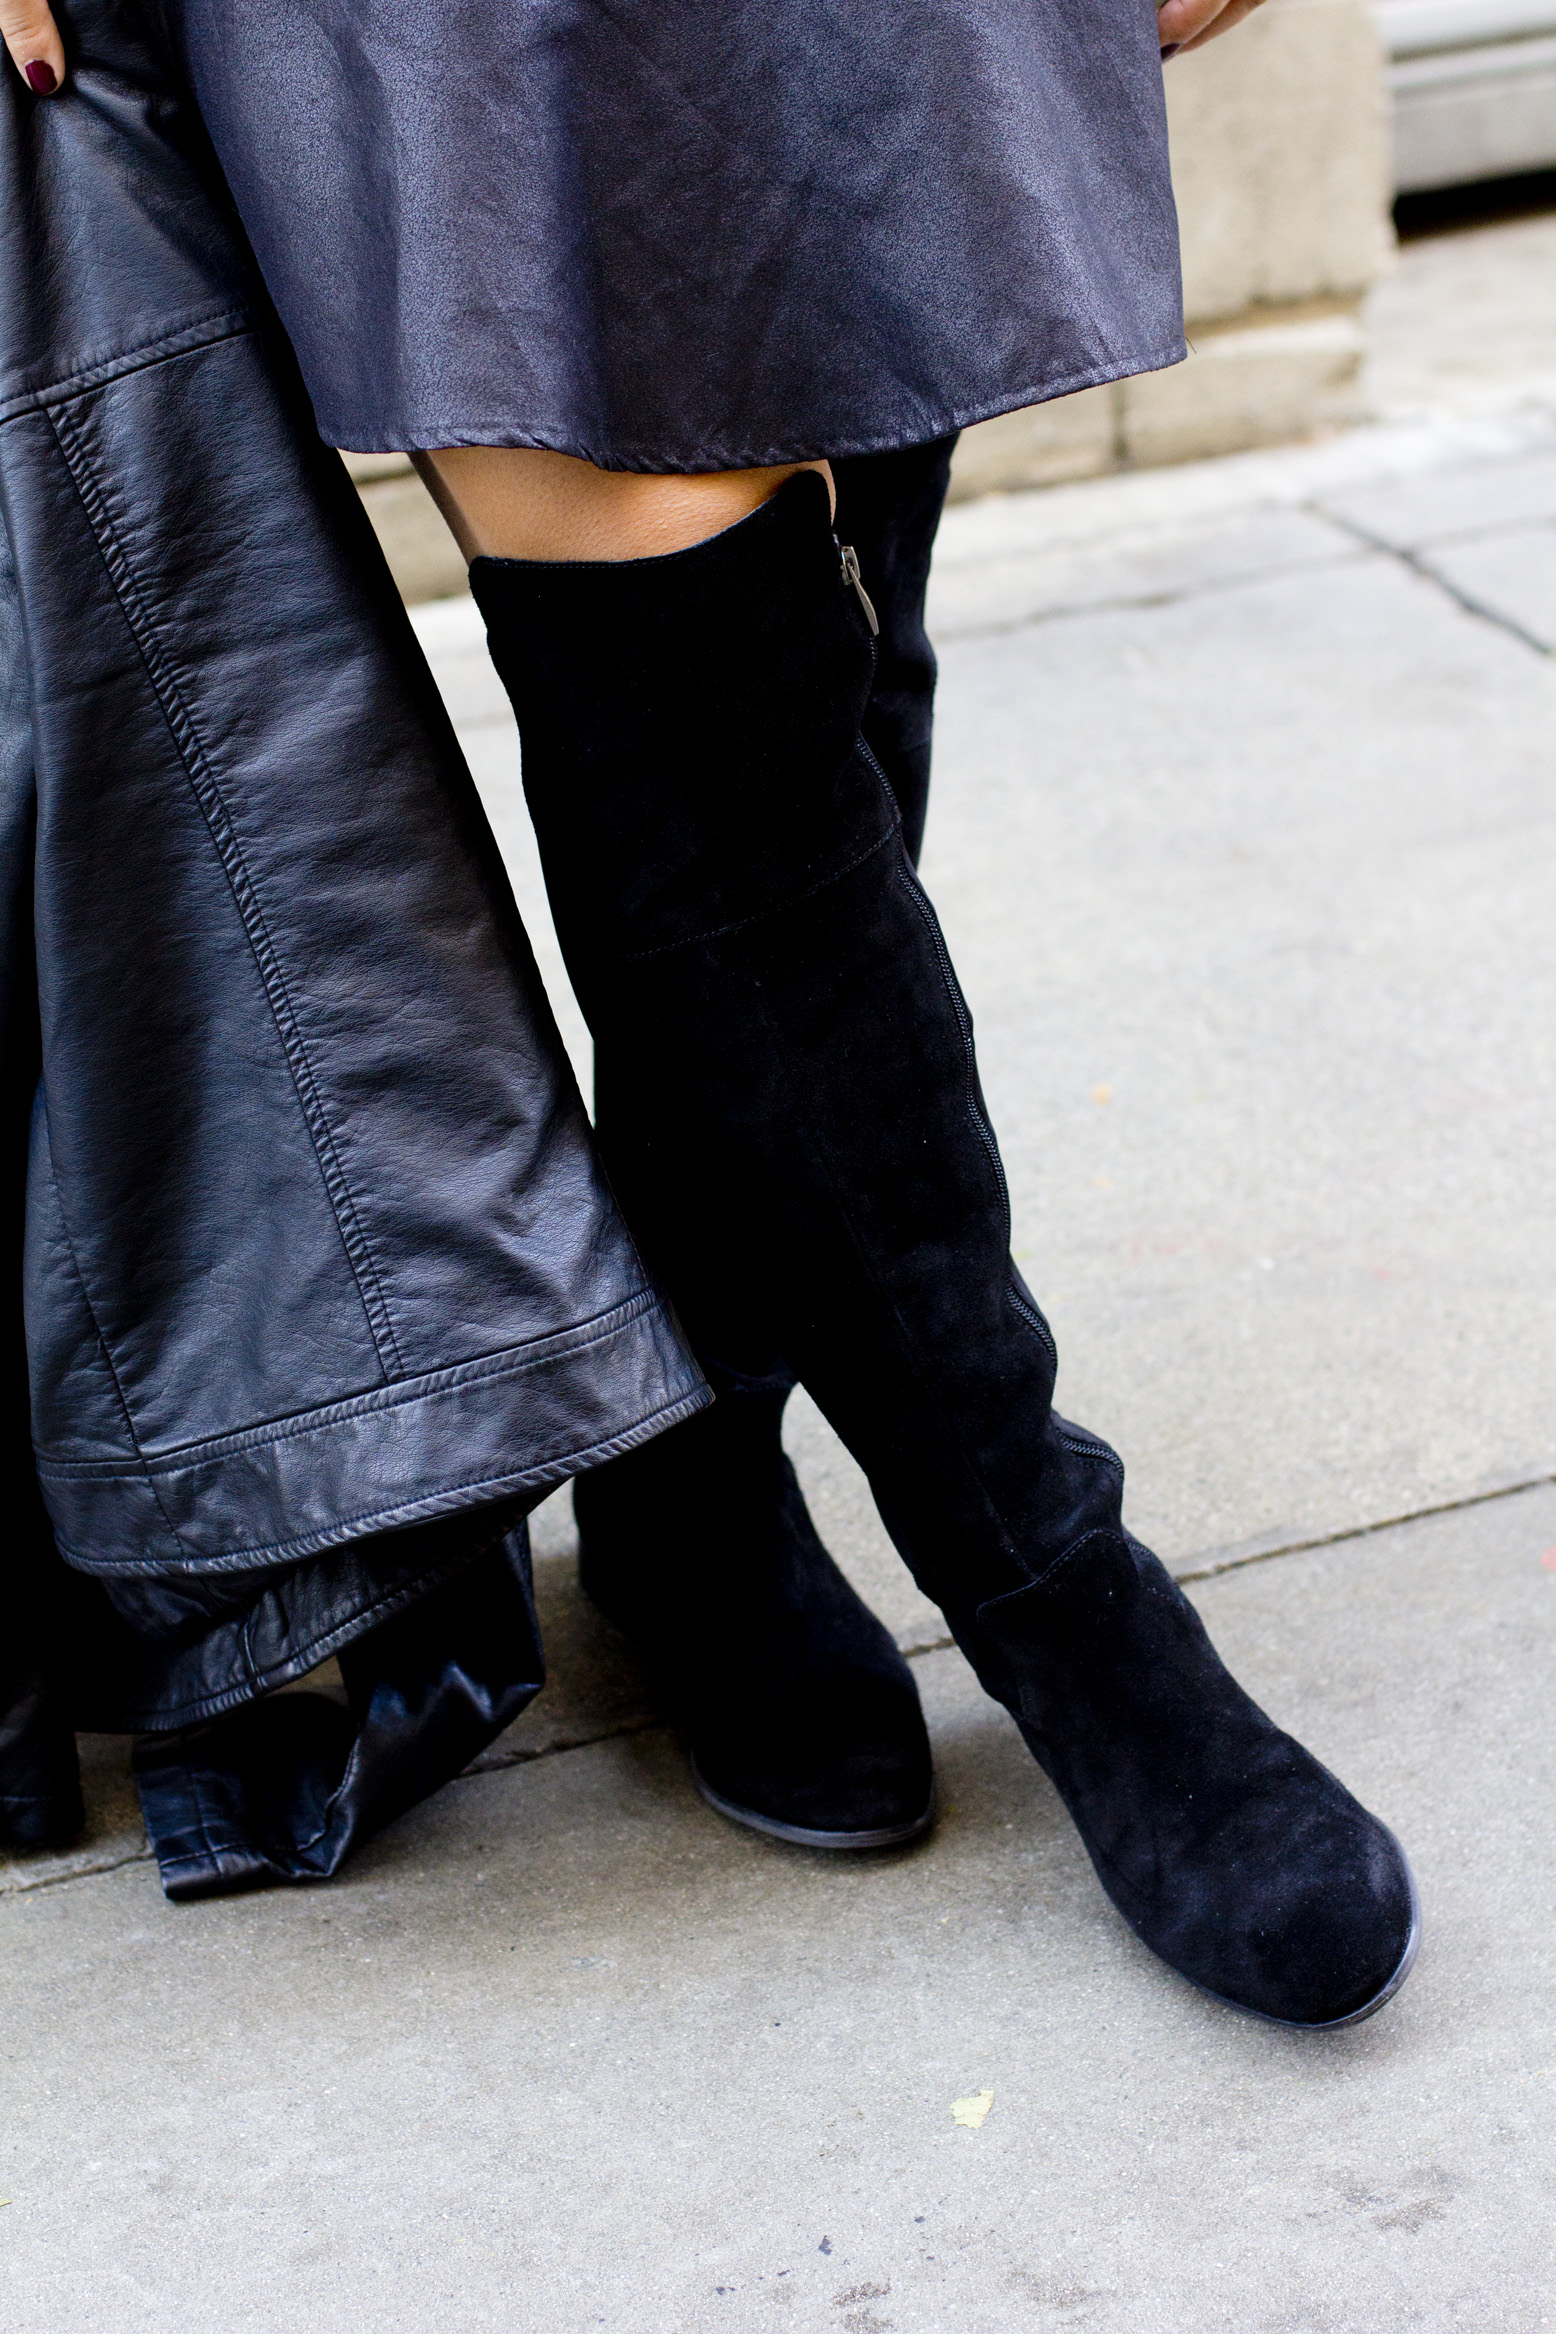 My Franco Sarto Over The Knee Boots for Winter from DSW • Rossana Vanoni